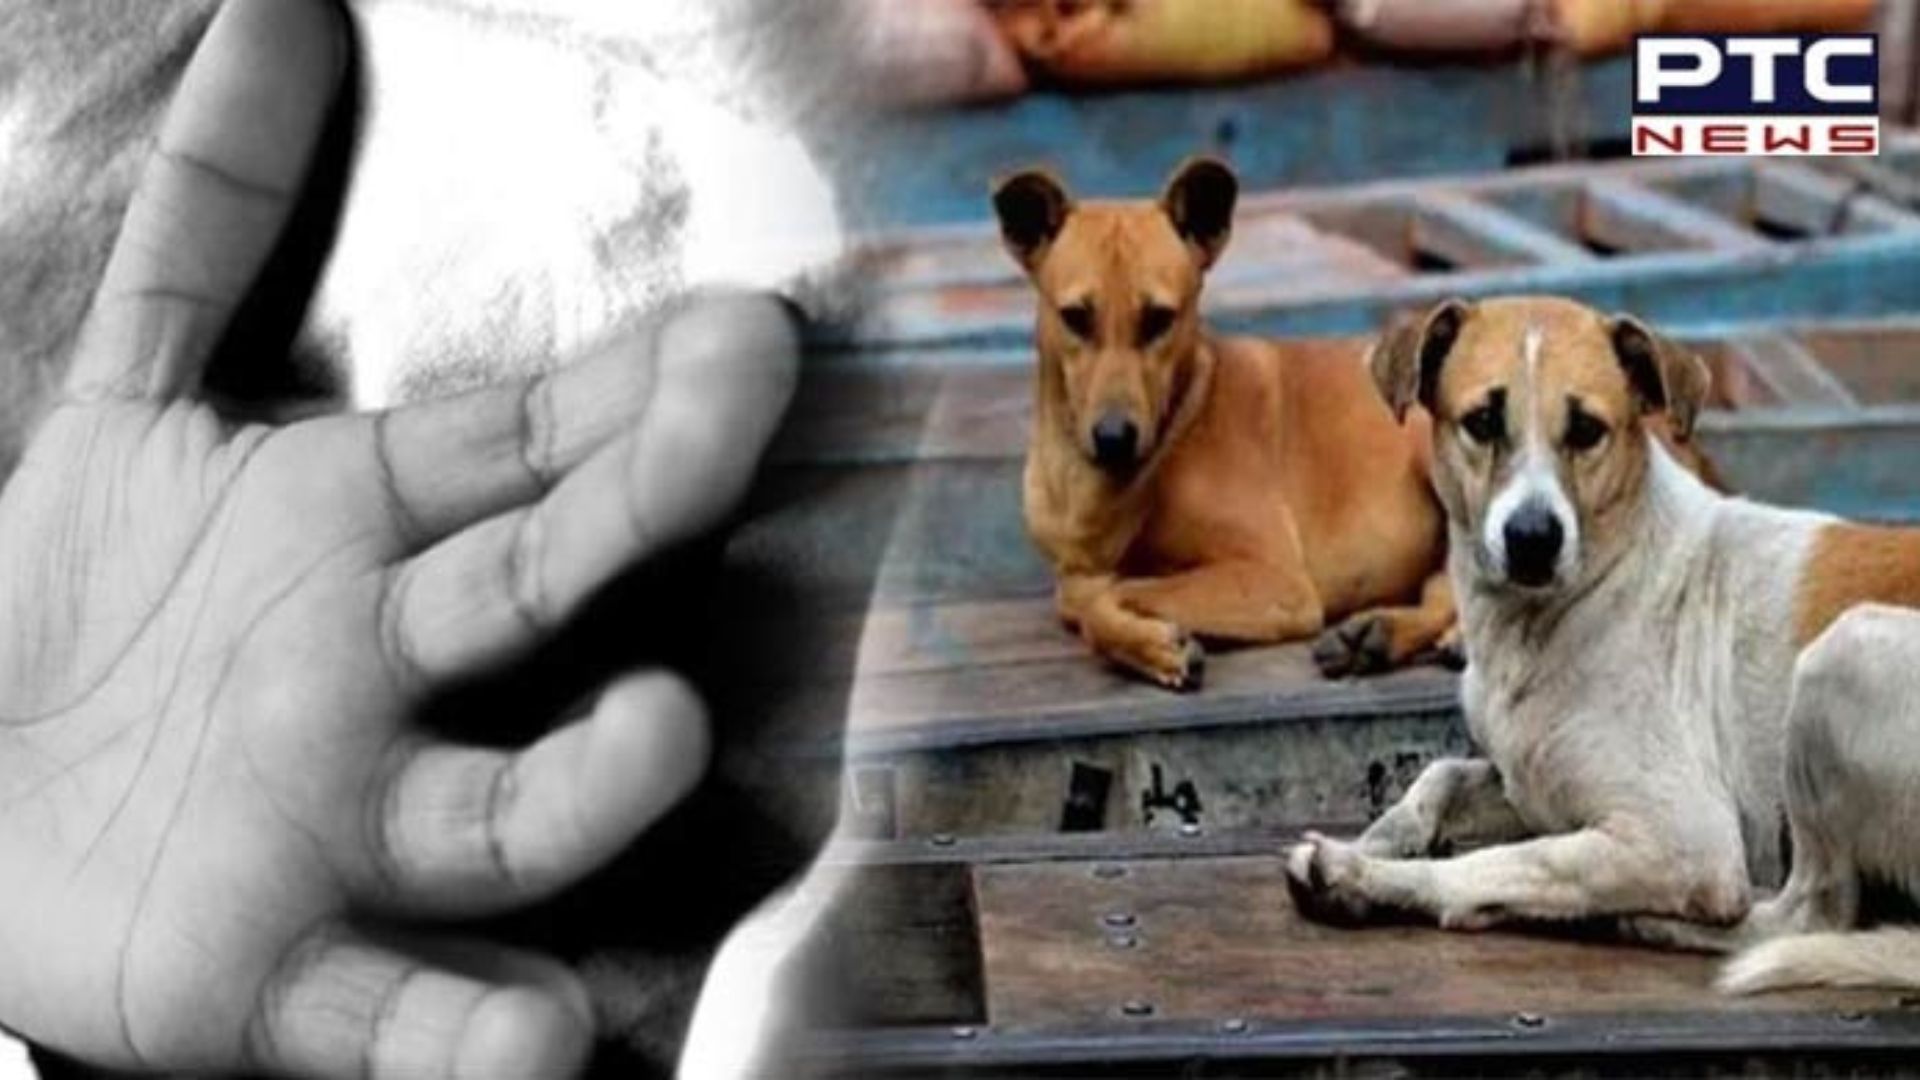 Stray dog menace: Toddler dies in attack by stray dogs in Hyderabad